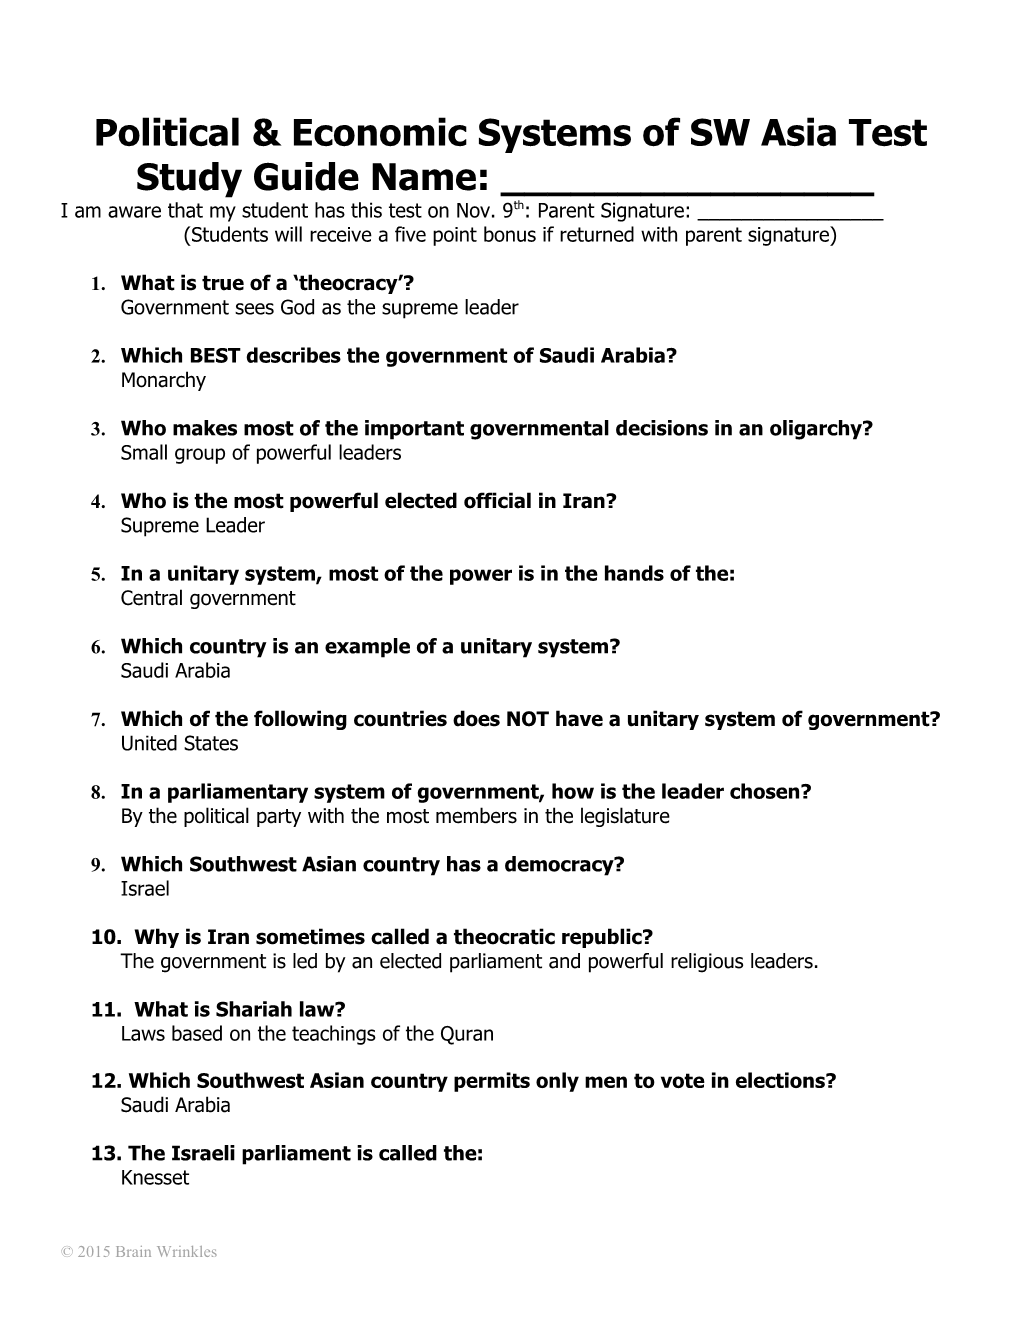 Political & Economic Systems of SW Asia Test Study Guide Name: ______